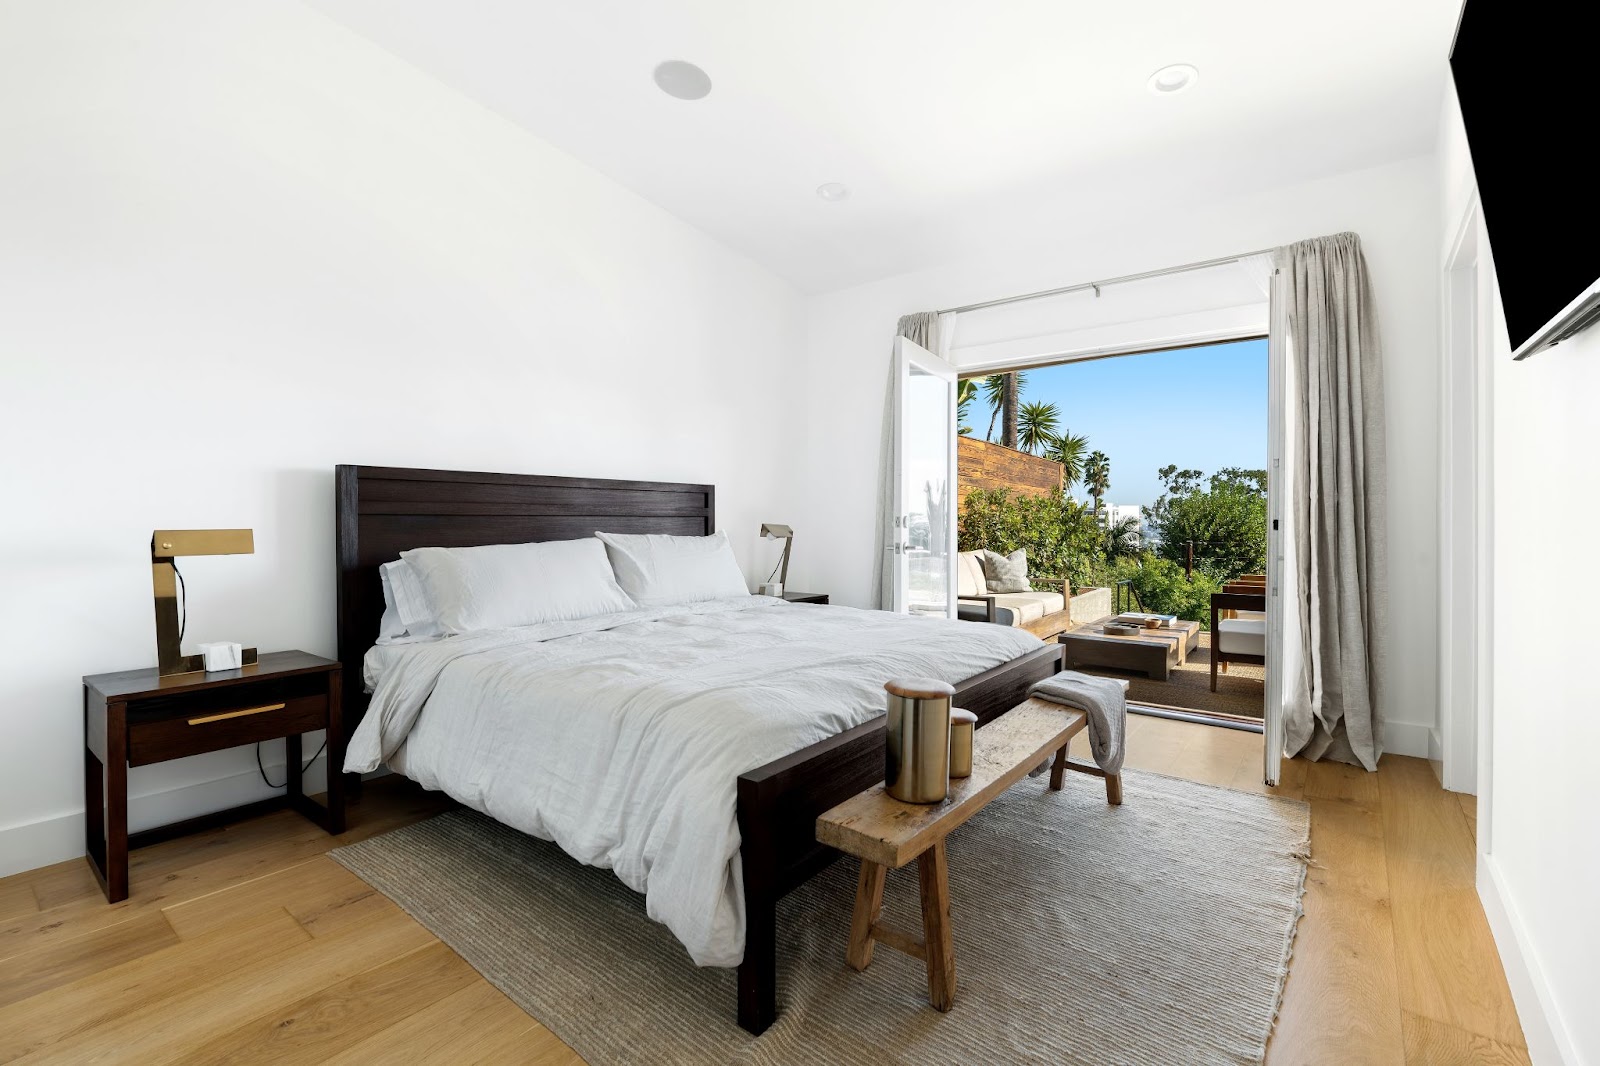 A sunny Los Angeles bedroom was the start of Open Air Homes' extensive luxury short-term rental portfolio.